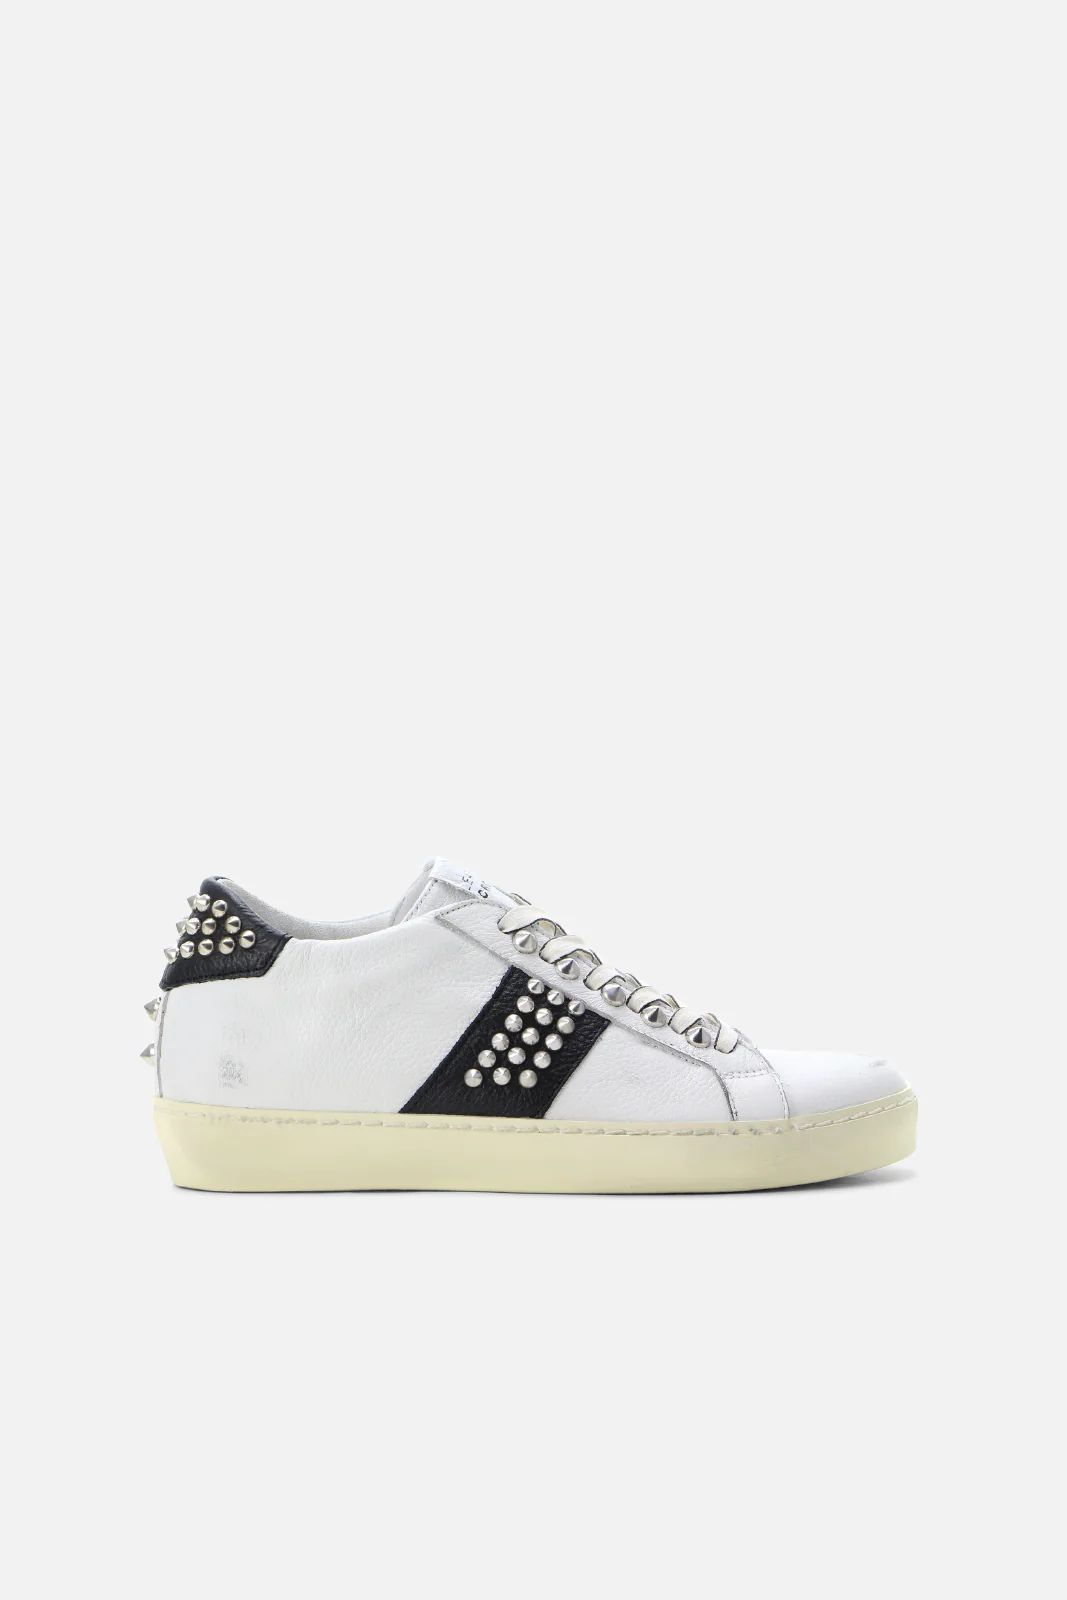 Leather Crown Iconic Stud Low Top Sneakers in White/Black Bandier | Bandier